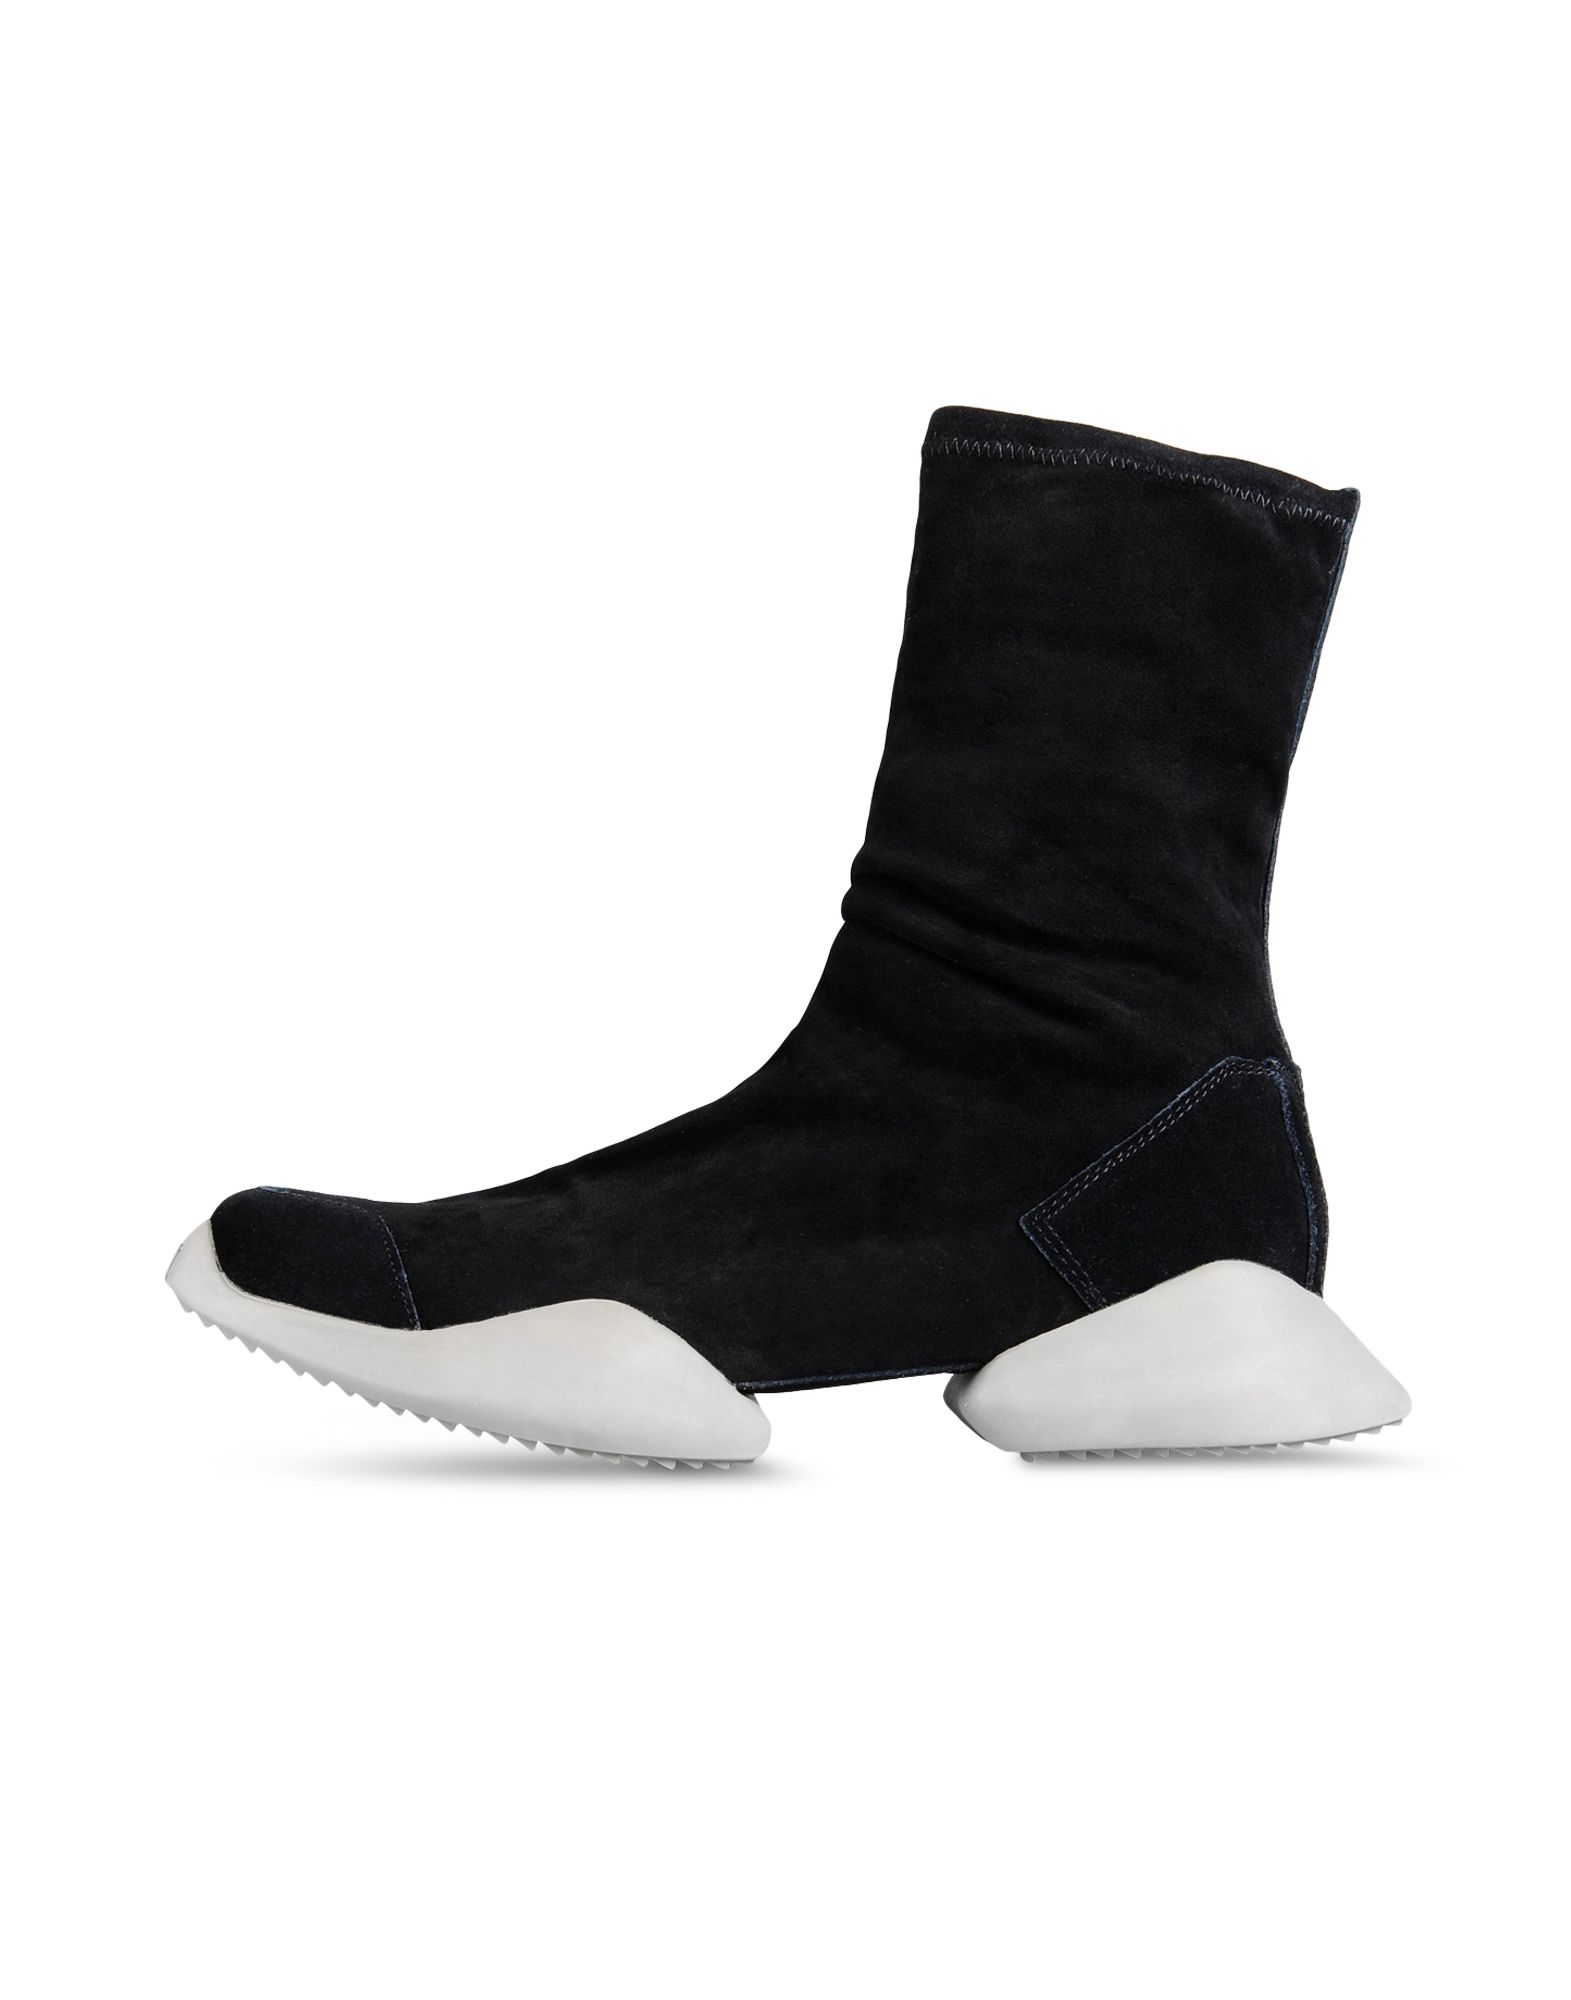 Adidas By RICK OWENS ANKLE BOOT Boots | Adidas Y-3 Official Store